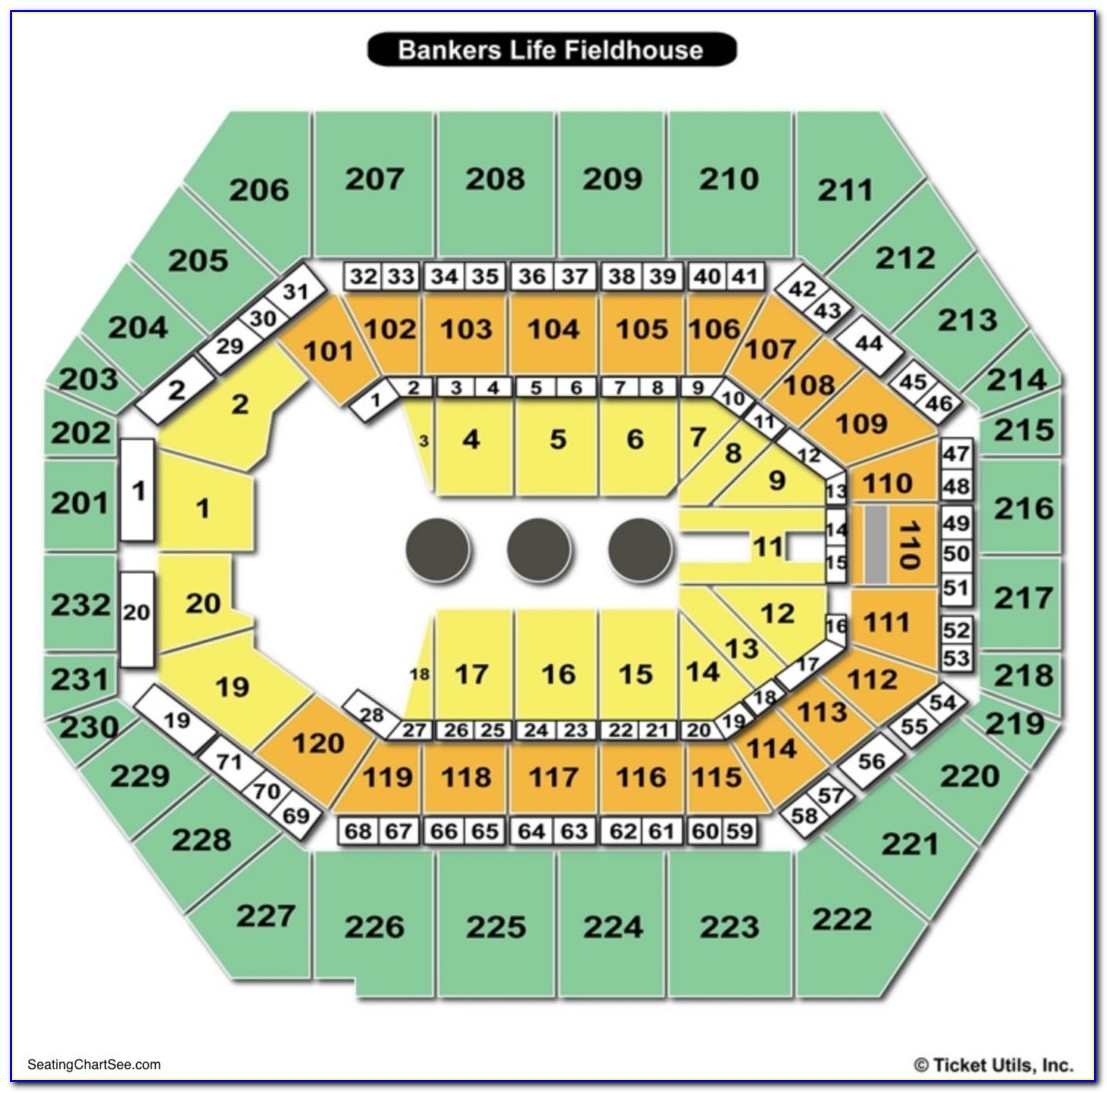 Bankers Life Fieldhouse Seating Chart View